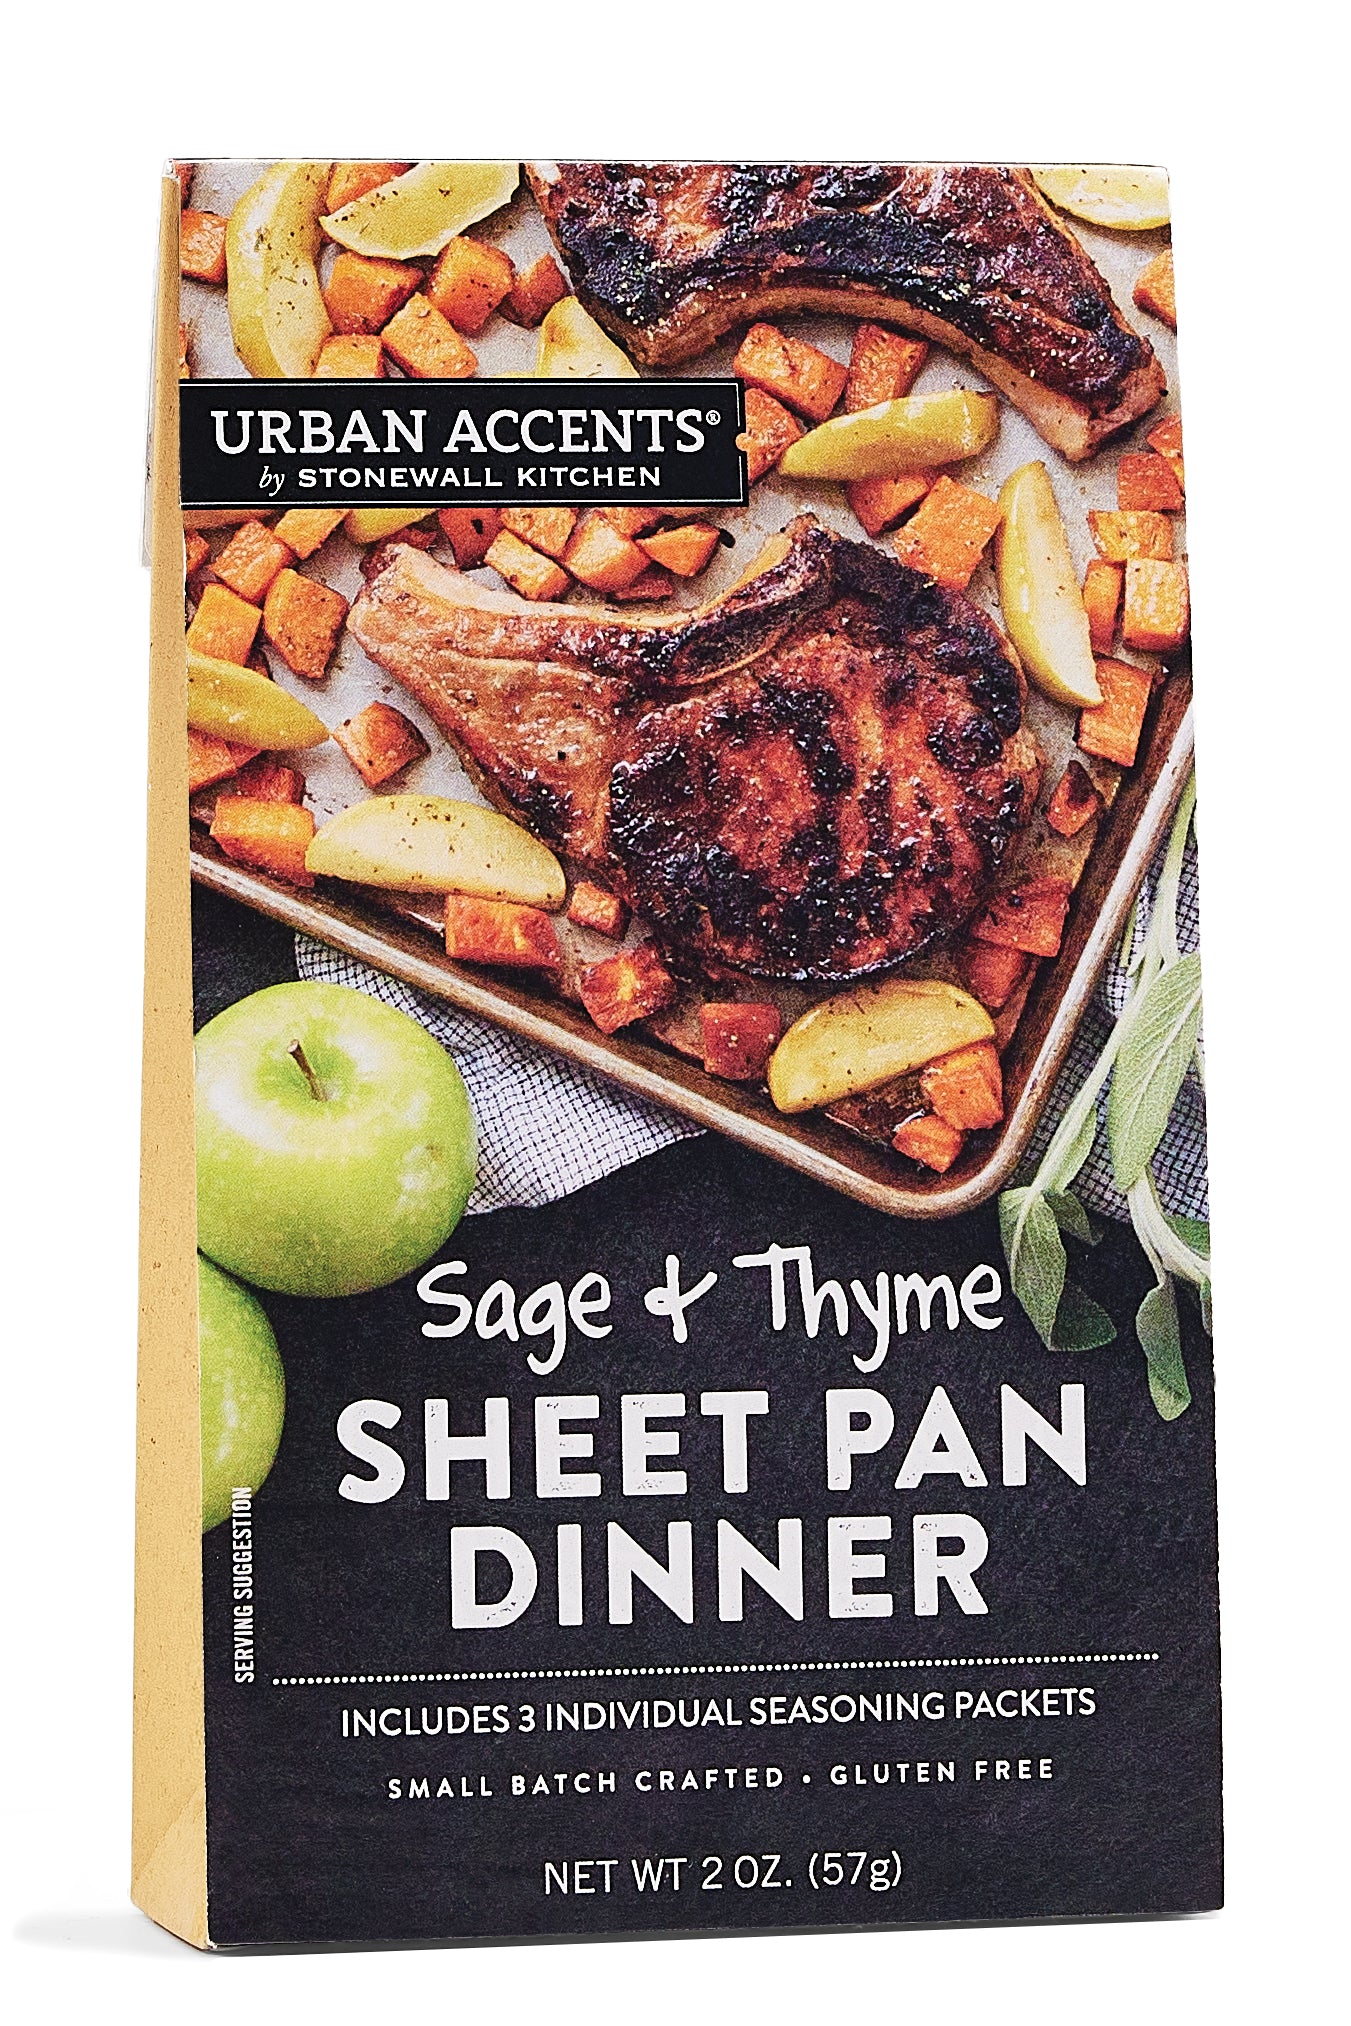 Urban Accents Sage and Thyme Sheet Pan Dinner - Olive Oil Etcetera 